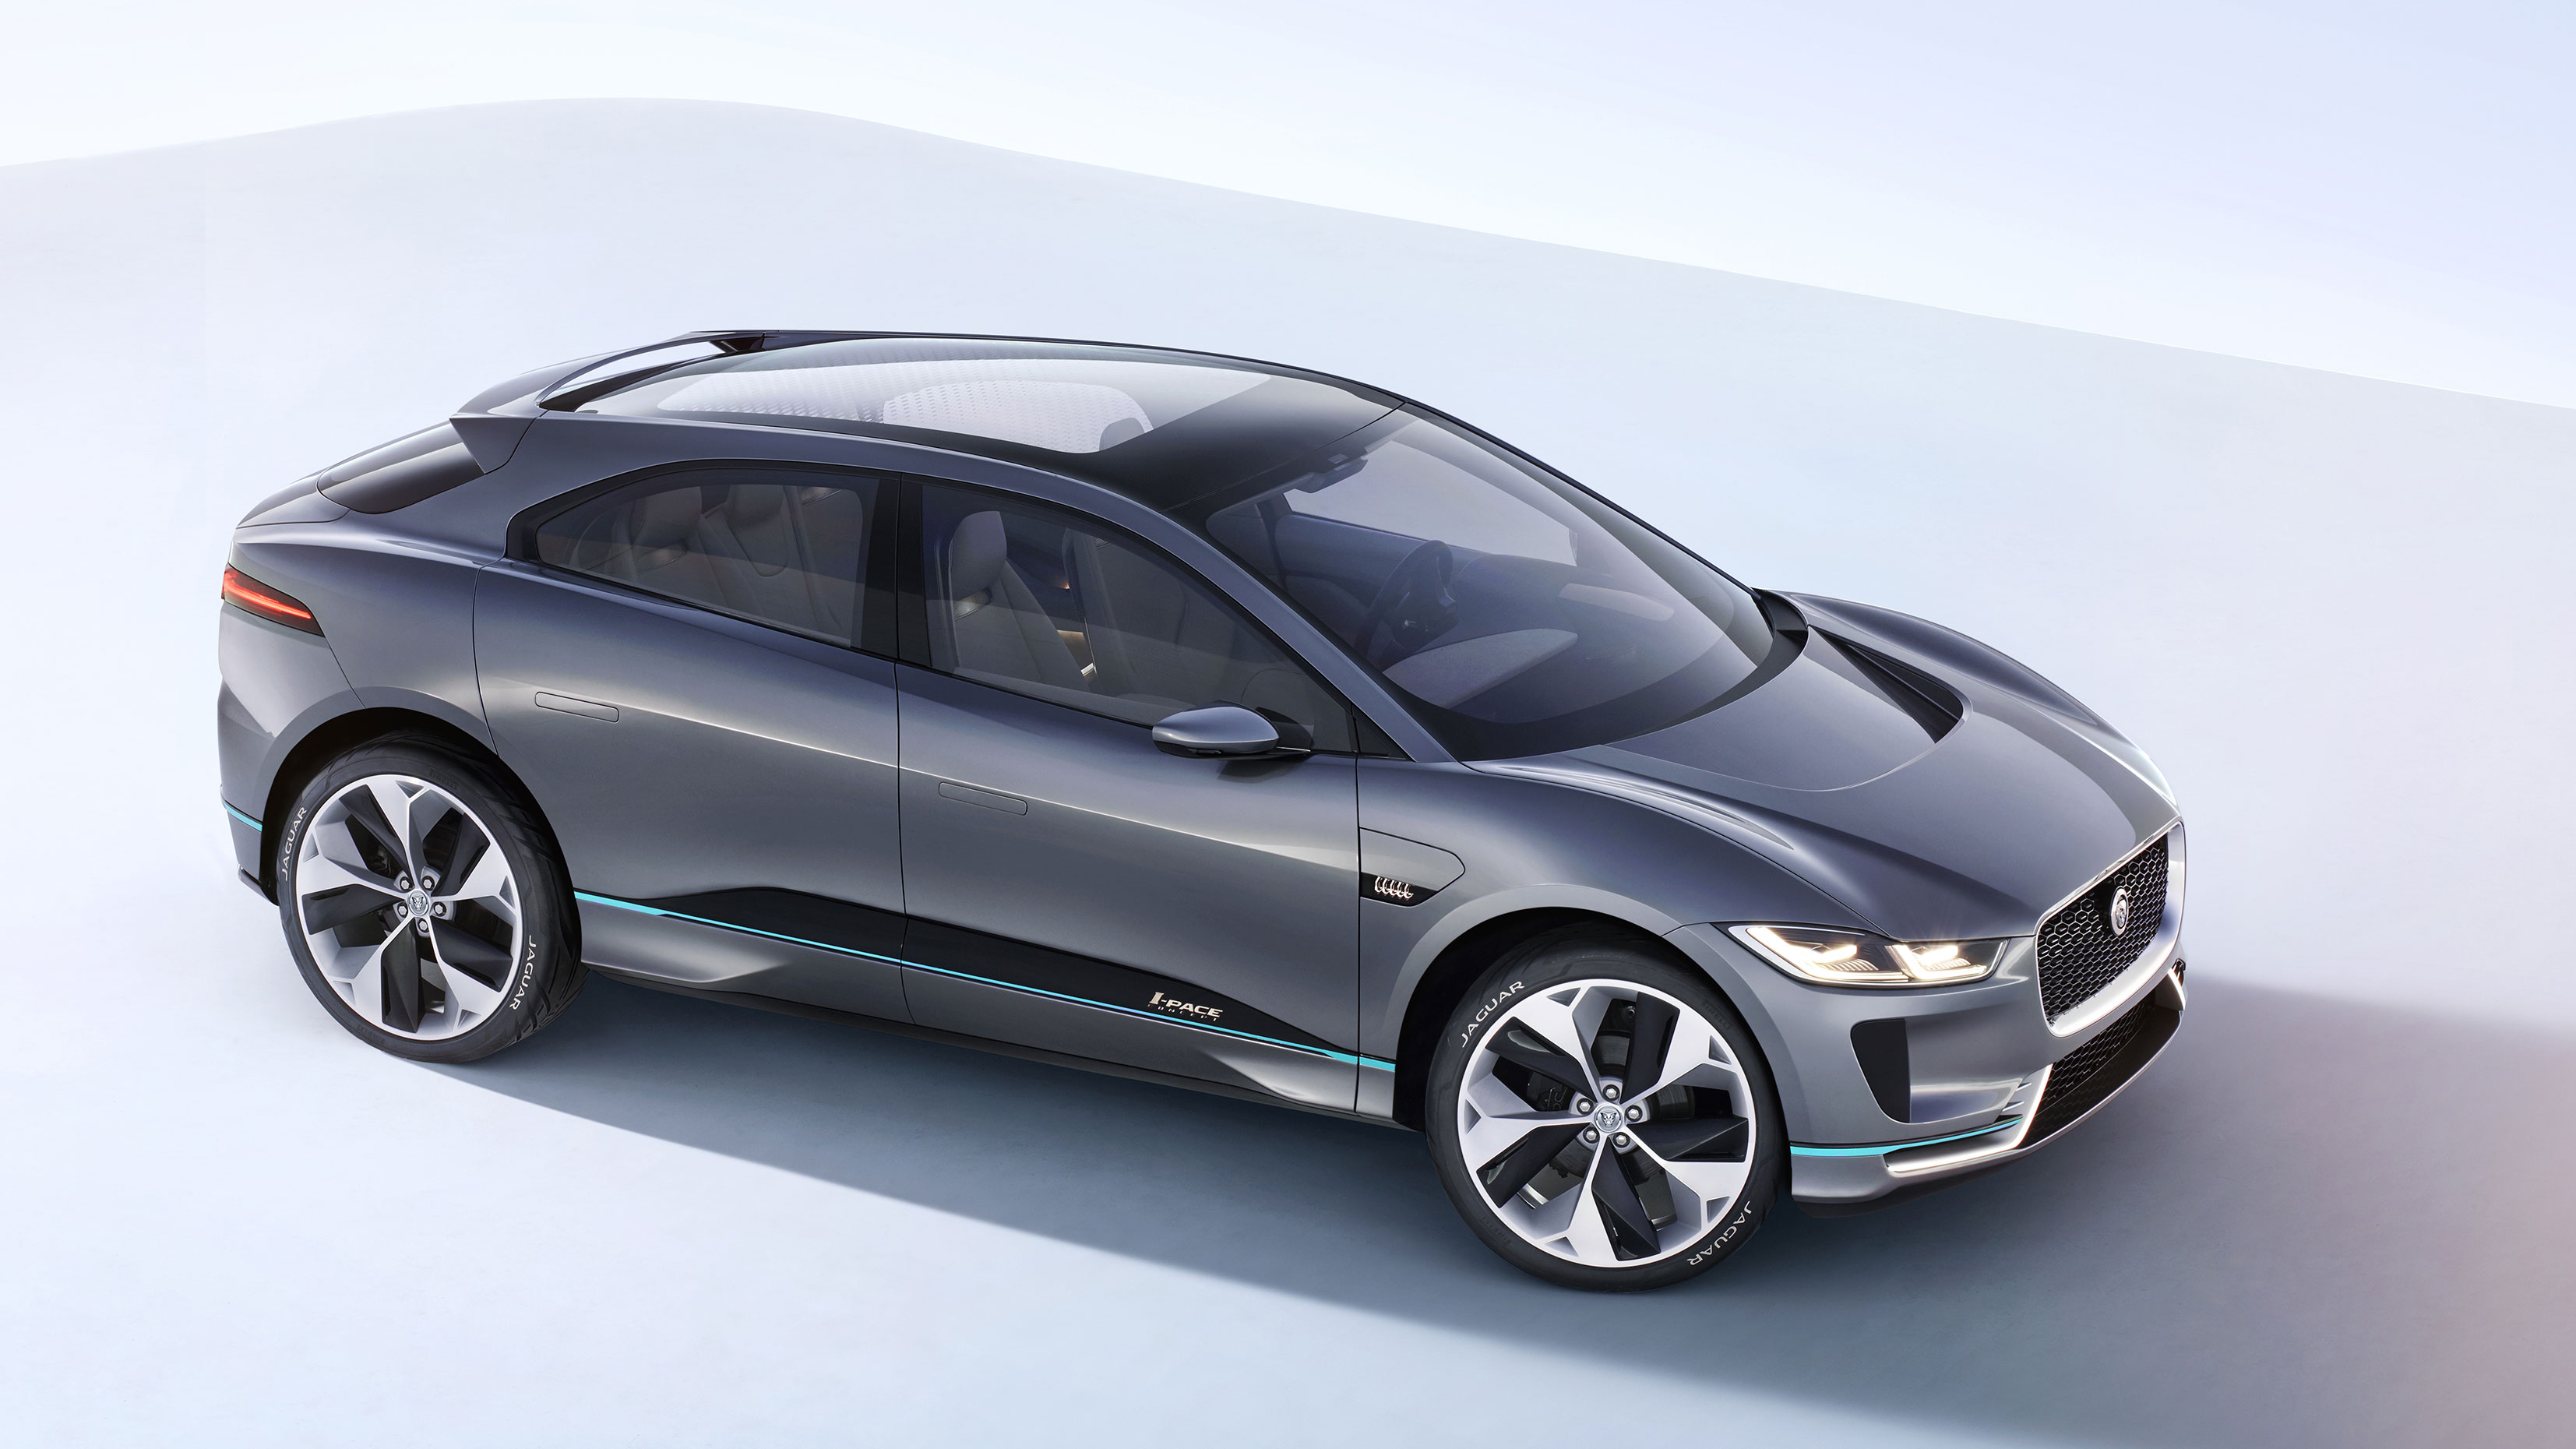 Jaguar’s first allelectric car gives us a glimpse of the future